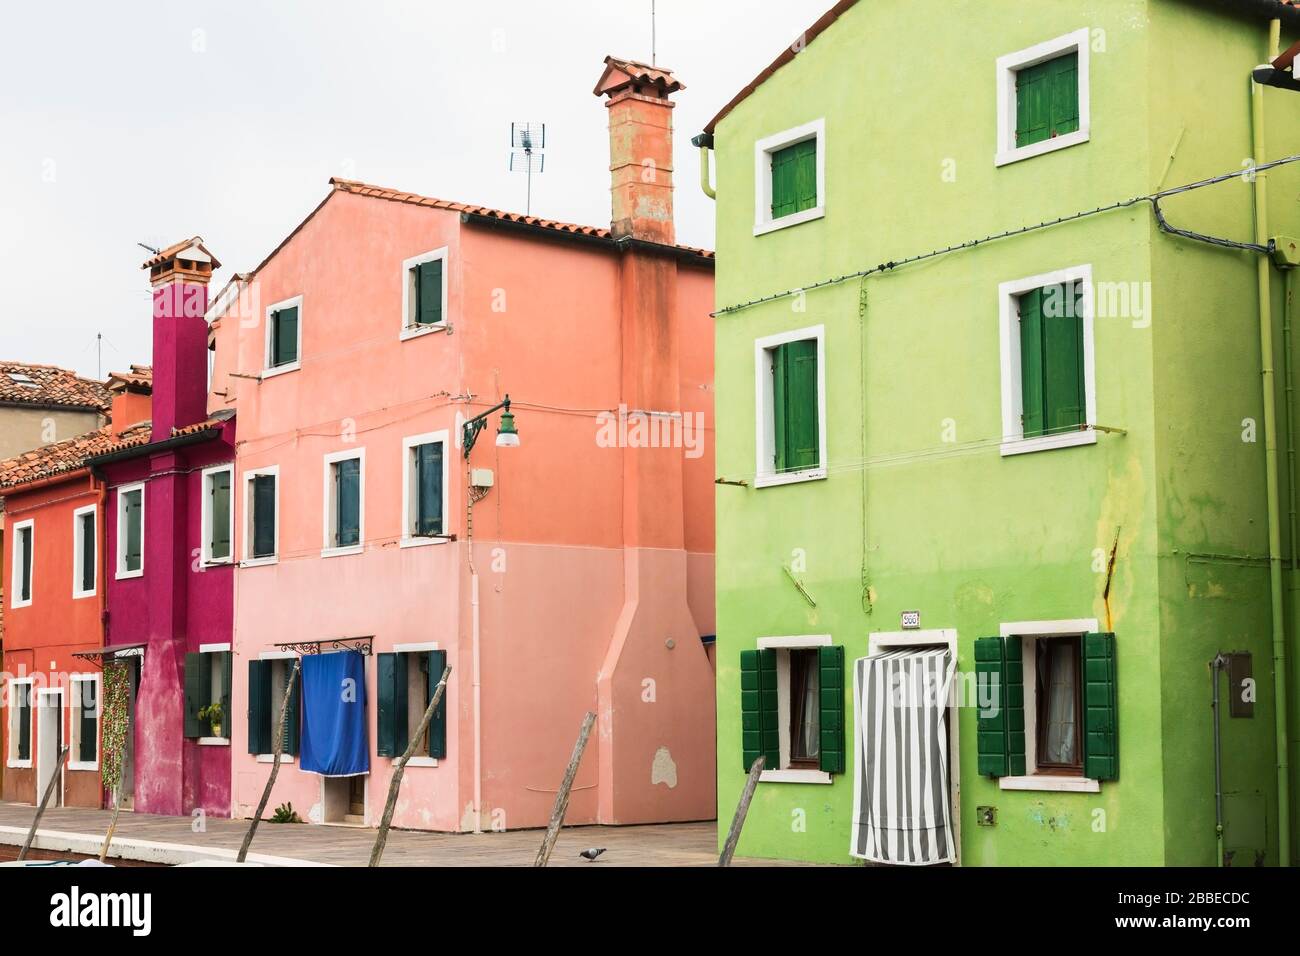 Green, pink, purple and red stucco houses decorated with curtains over entrance doors, Burano Island, Venetian Lagoon, Venice, Veneto, Italy Stock Photo